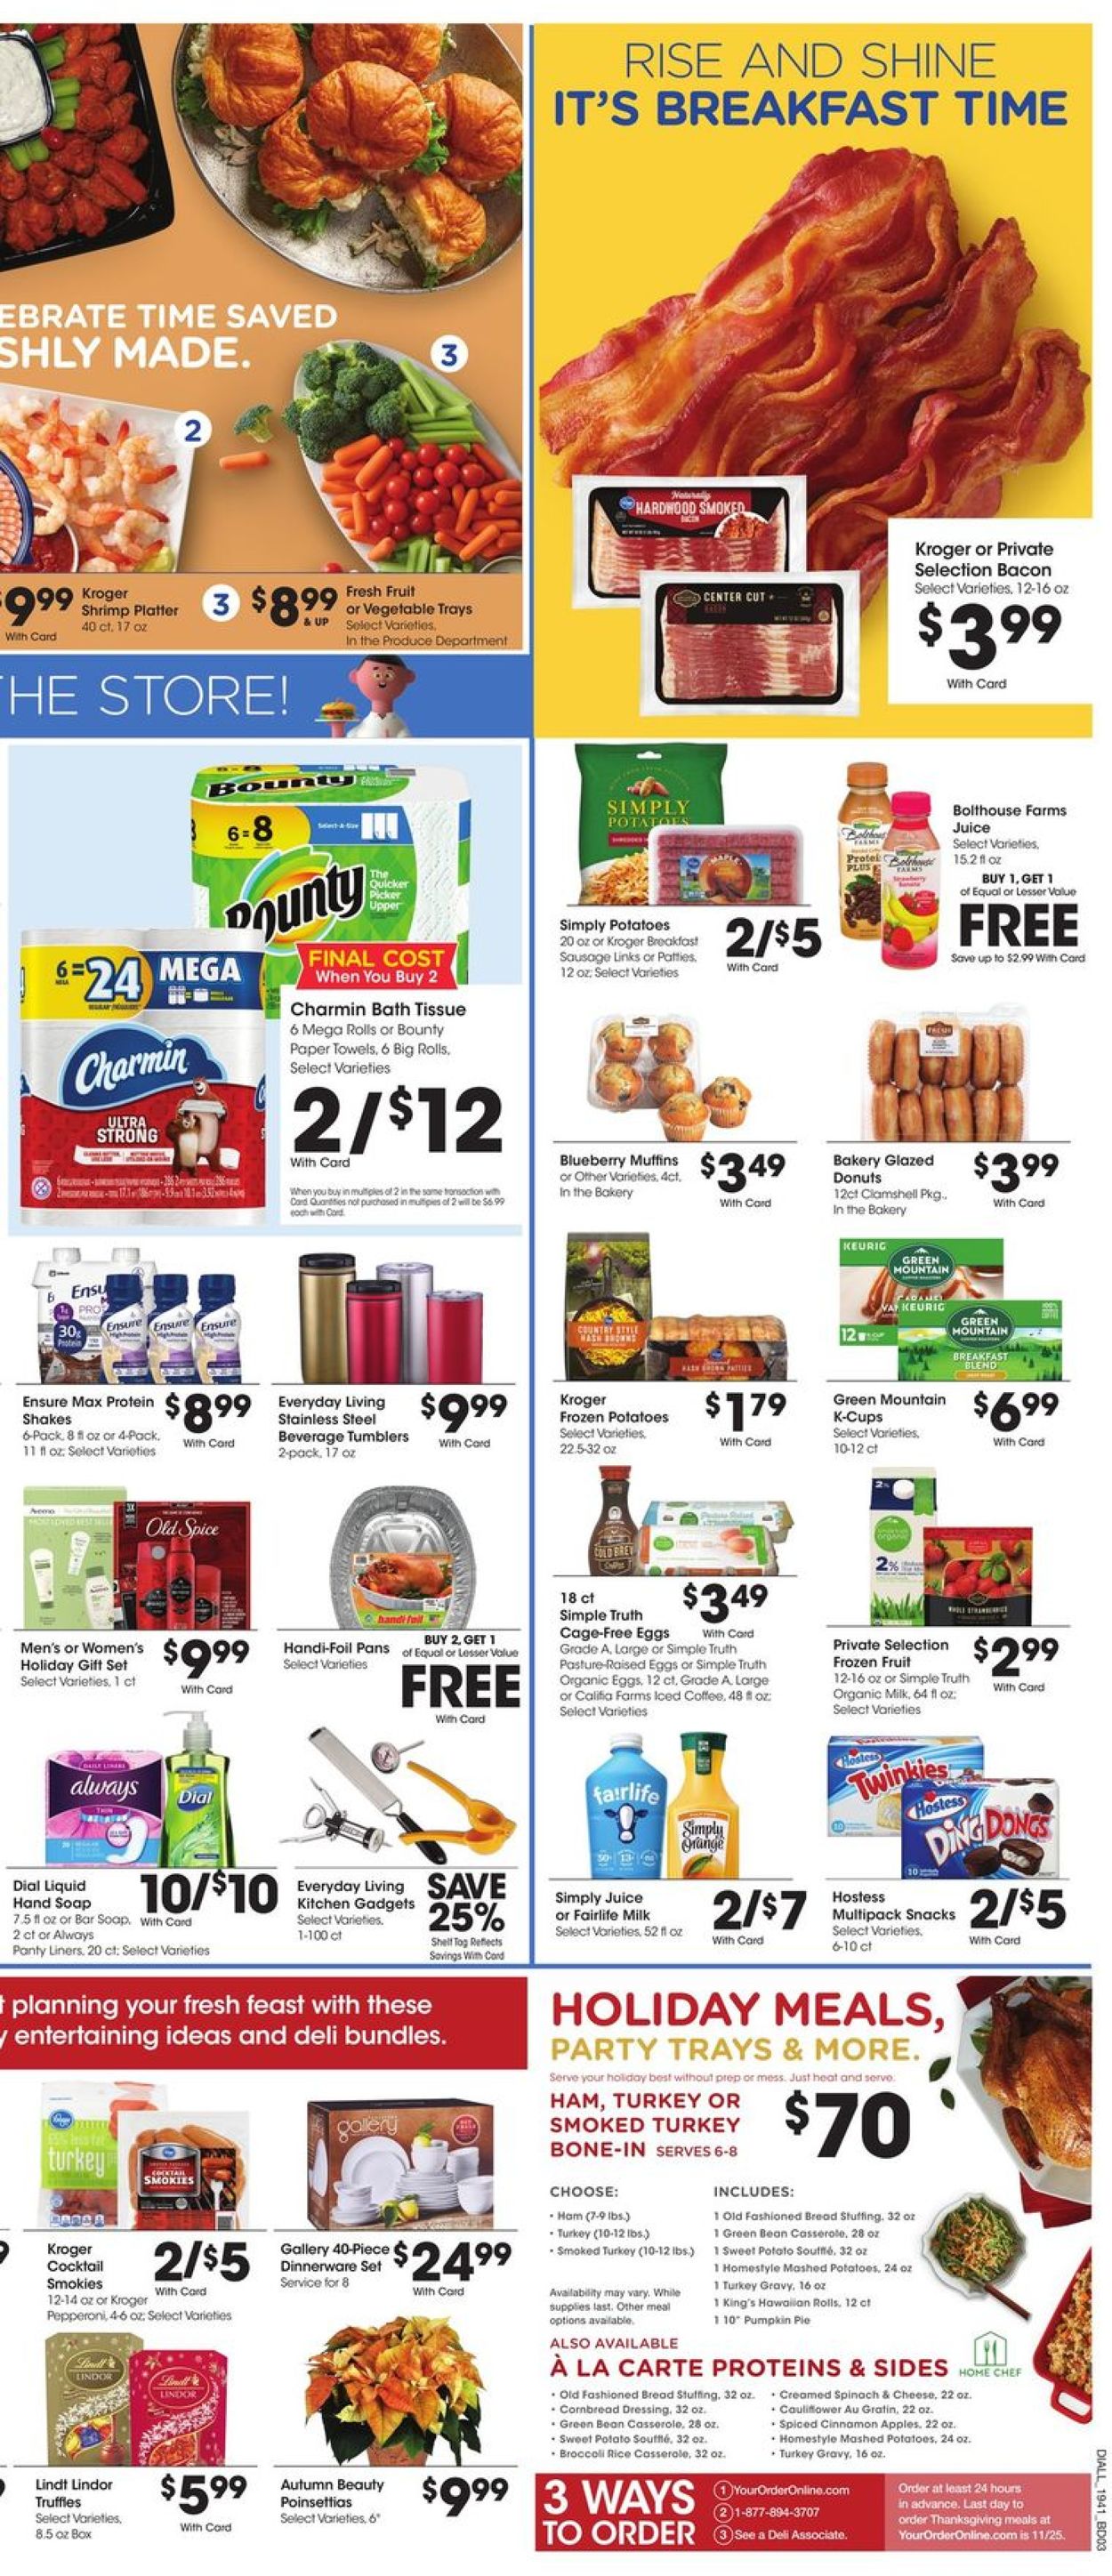 Dillons Current weekly ad 11/13 - 11/19/2019 [6] - frequent-ads.com